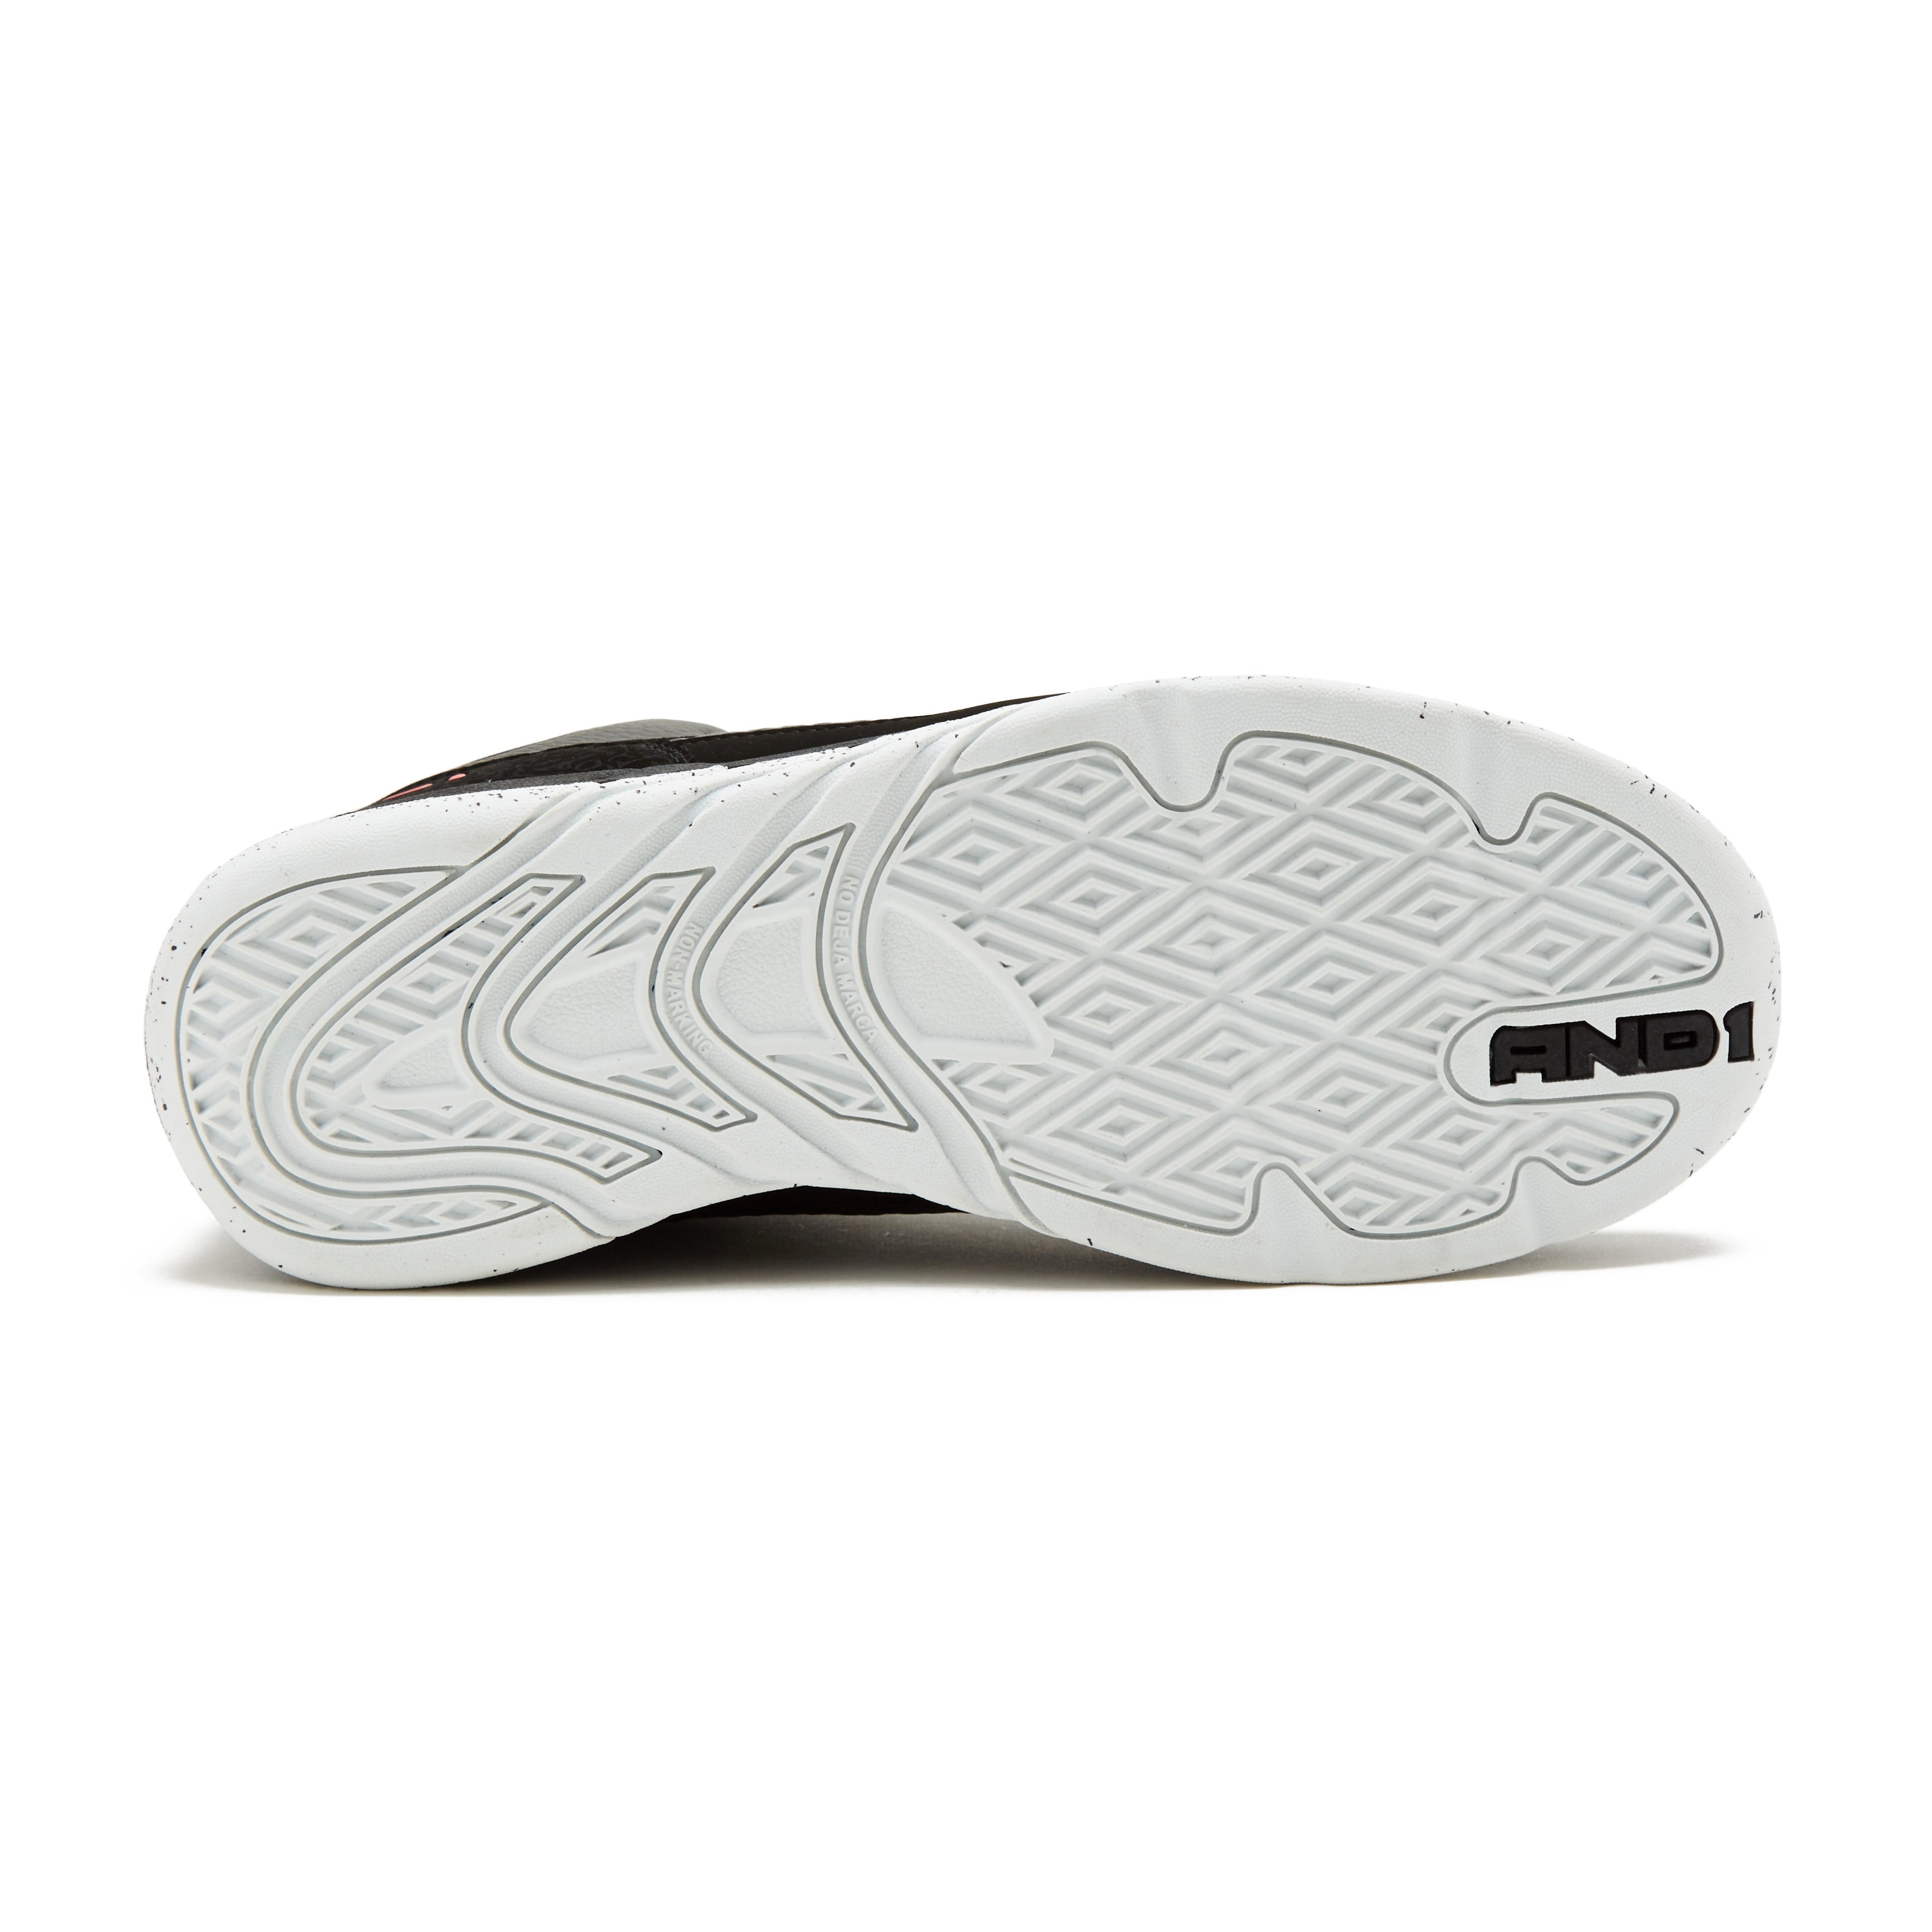 and1 men's capital 2.0 athletic shoe